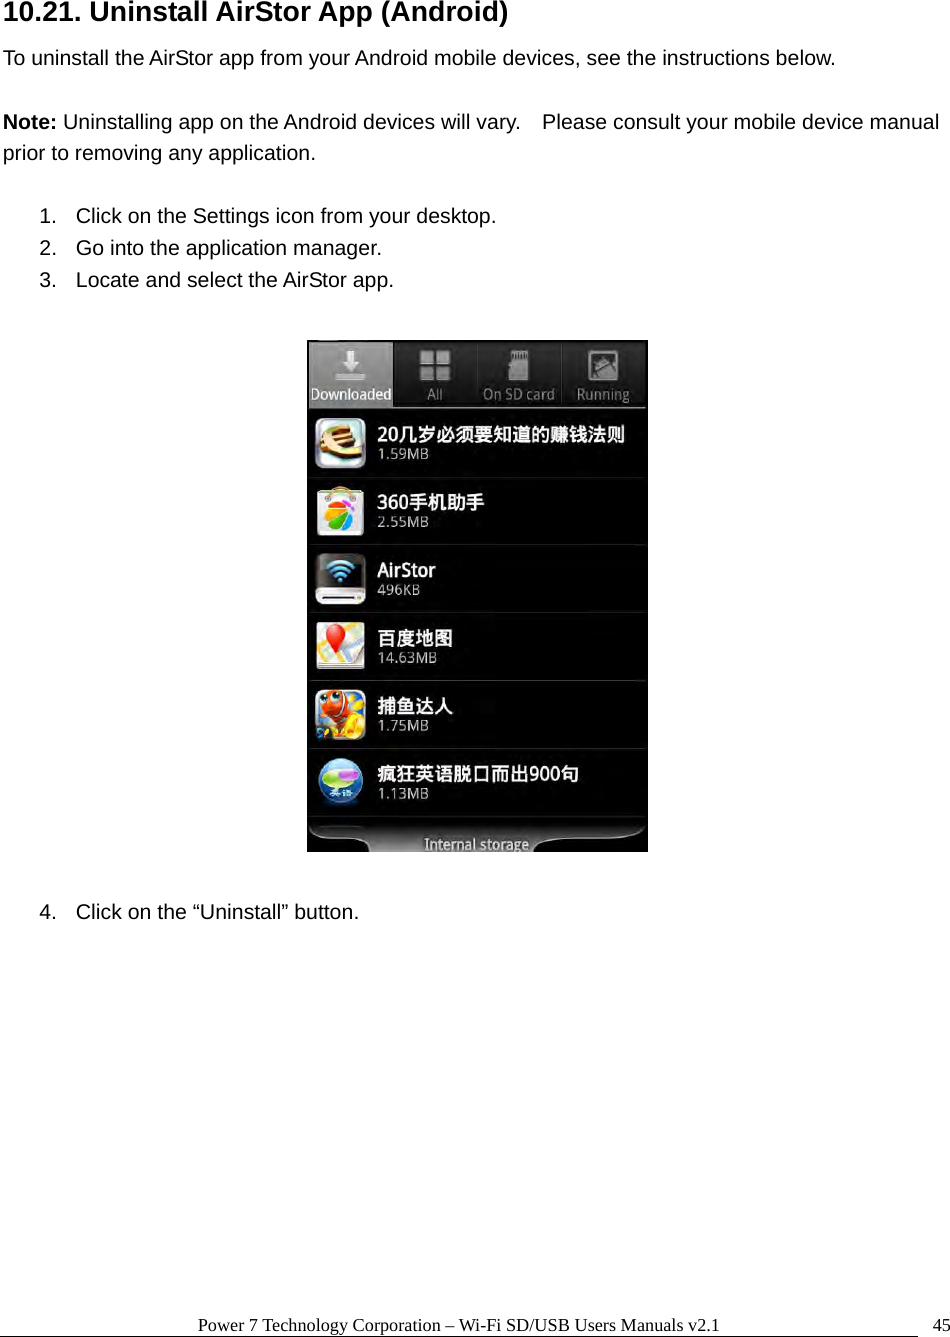 Power 7 Technology Corporation – Wi-Fi SD/USB Users Manuals v2.1  4510.21. Uninstall AirStor App (Android) To uninstall the AirStor app from your Android mobile devices, see the instructions below.      Note: Uninstalling app on the Android devices will vary.    Please consult your mobile device manual prior to removing any application.  1.  Click on the Settings icon from your desktop. 2.  Go into the application manager. 3.  Locate and select the AirStor app.    4.  Click on the “Uninstall” button.  